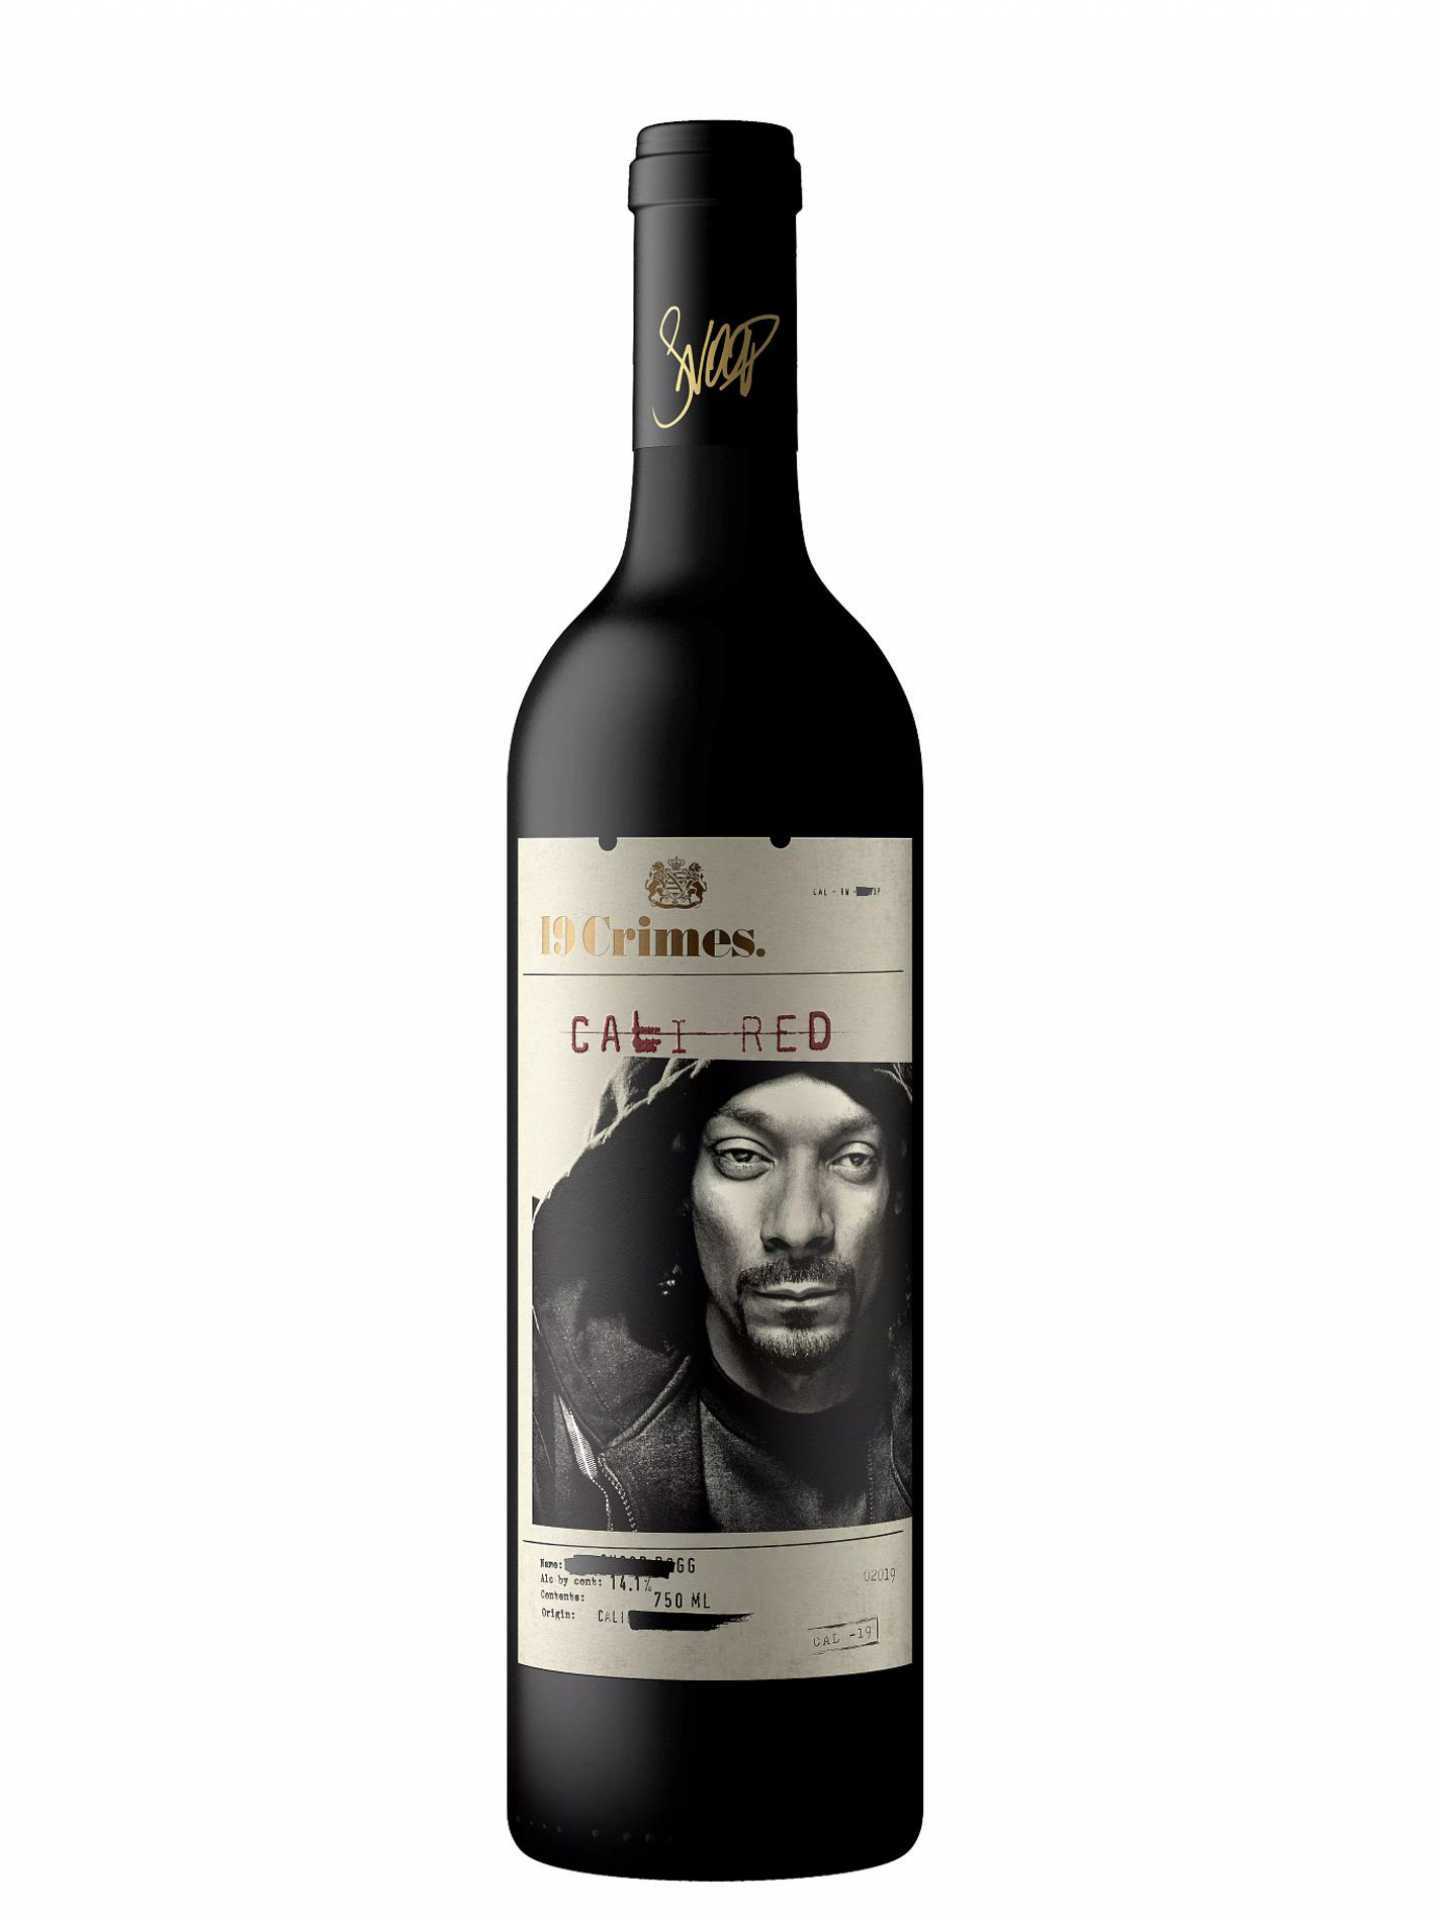 Celebrity wines | 19 Crimes Snoop Dogg Cali Red